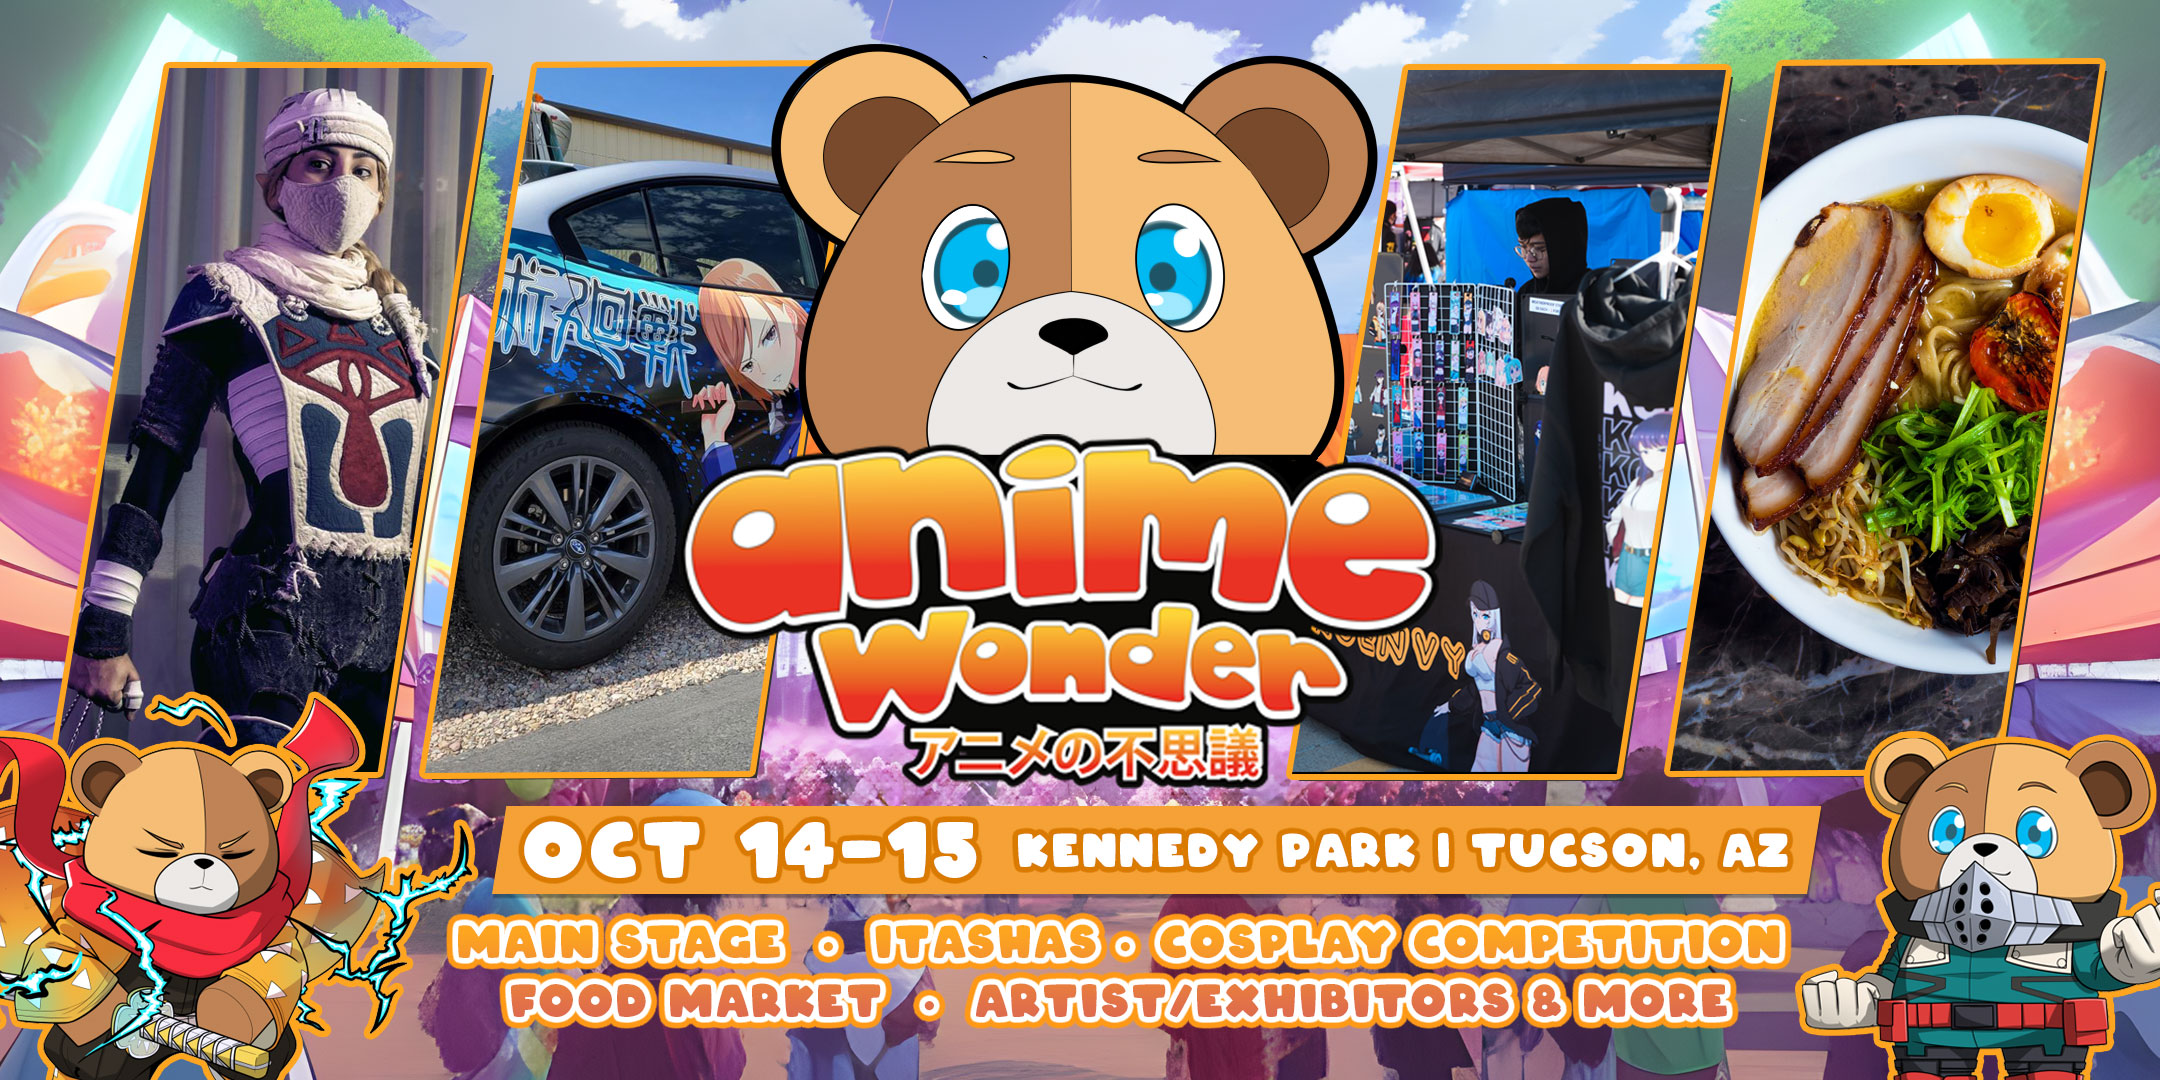 Taiyou Con Anime Convention 2022 | Phoenix Valley Review